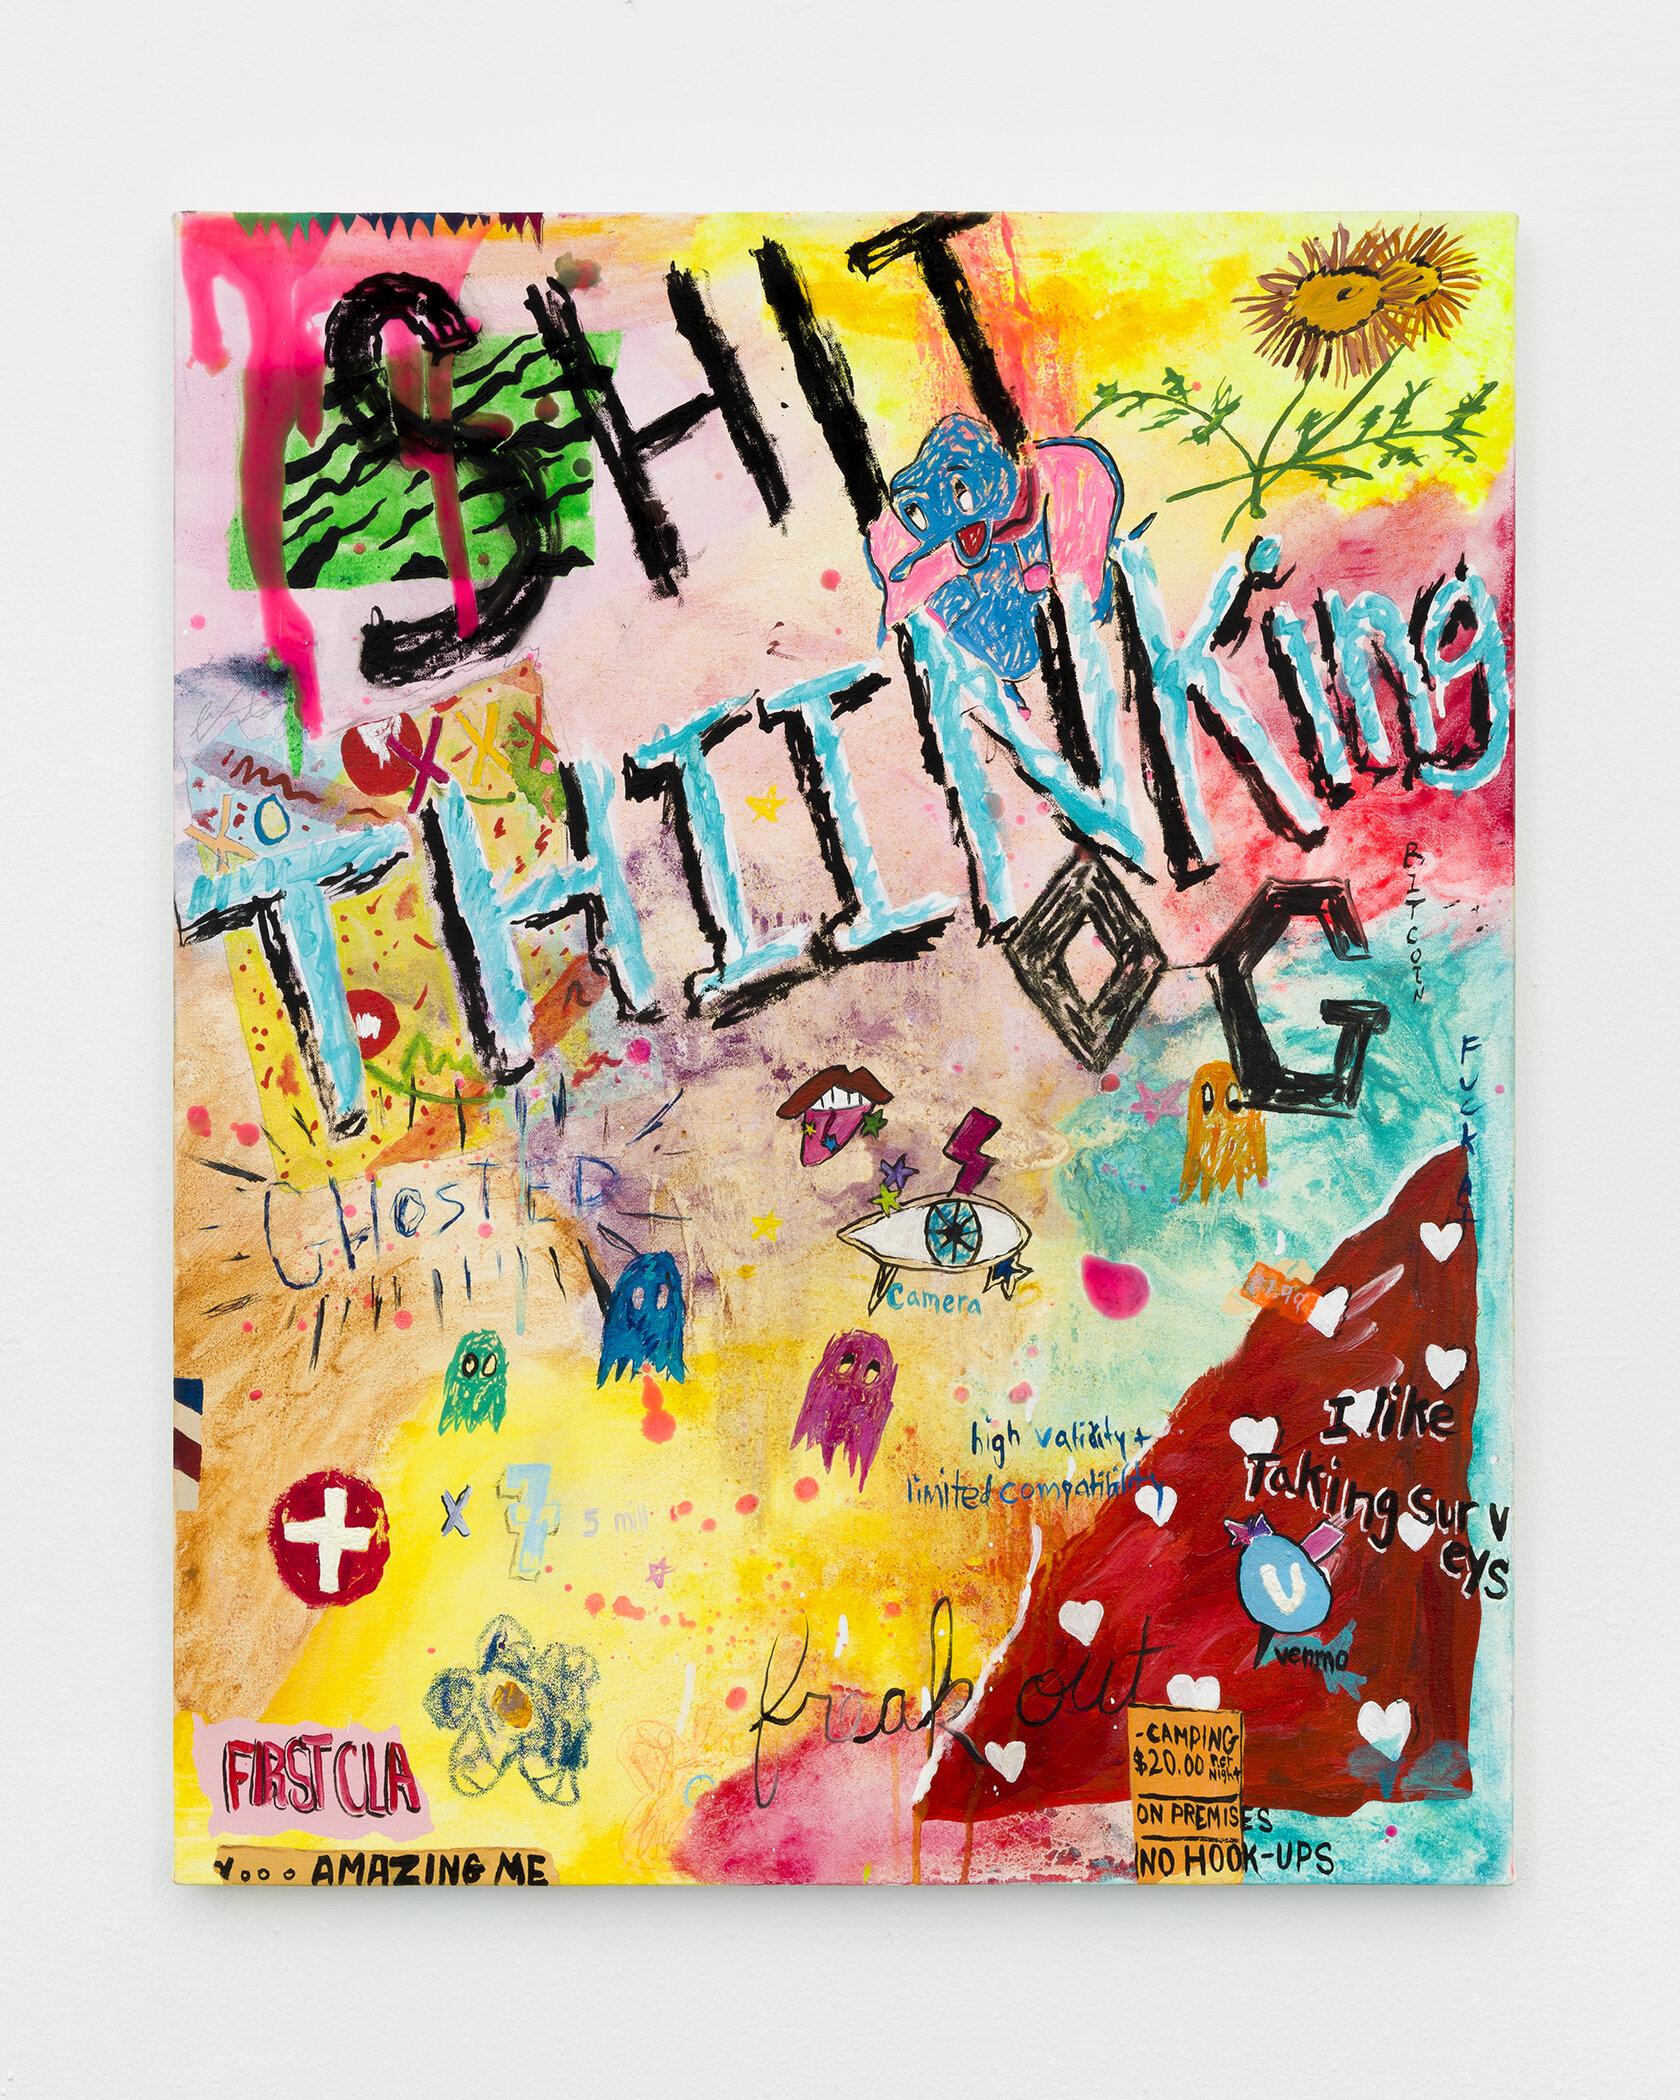  Alicia Gibson,  Shit Thinking,  2019, Oil and encaustic on linen,  30 × 24 inches  